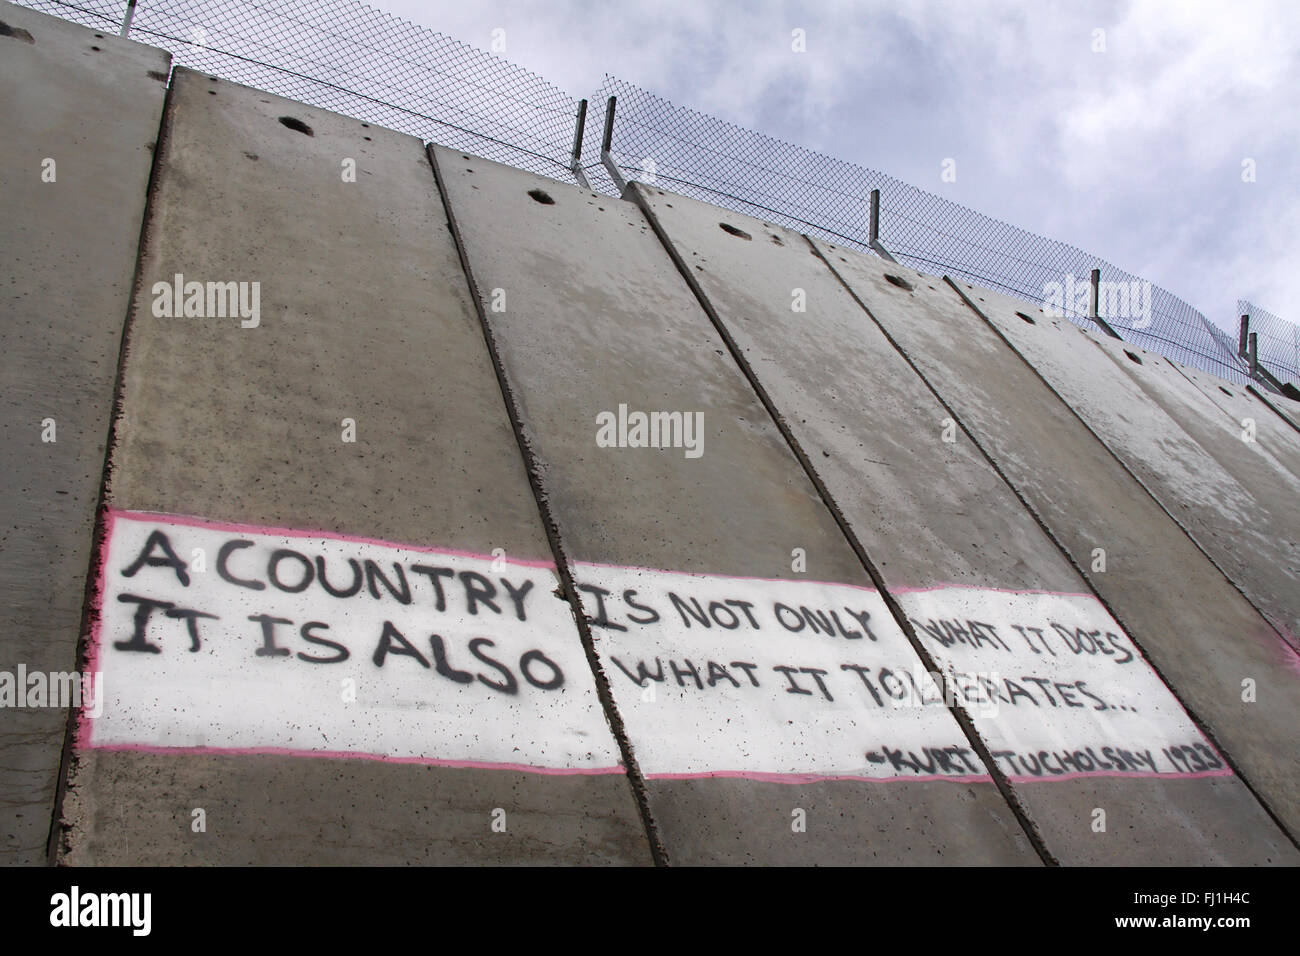 Palestine - Bethlehem checkpoint and occupation wall - palestinian occupied territories Stock Photo